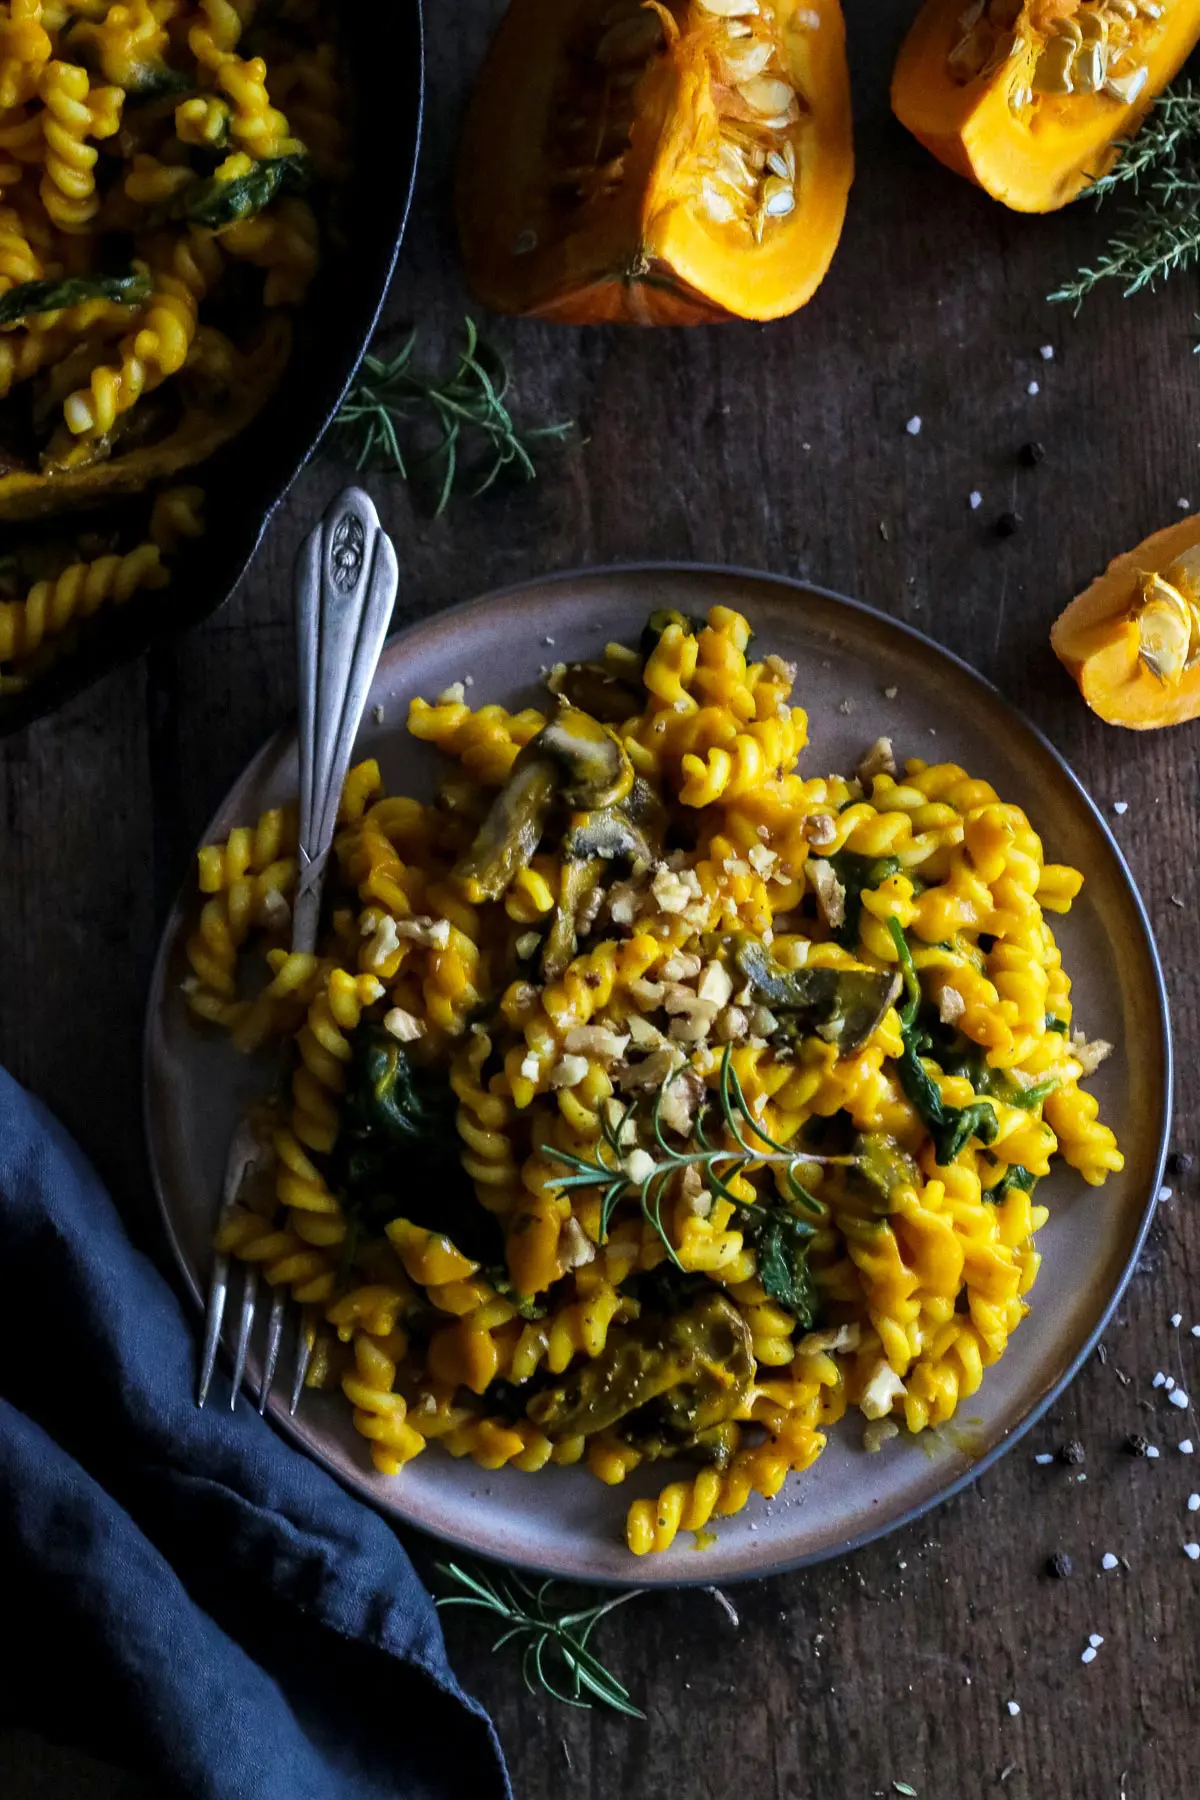 A Serving of Pumpkin Pasta with Mushrooms.